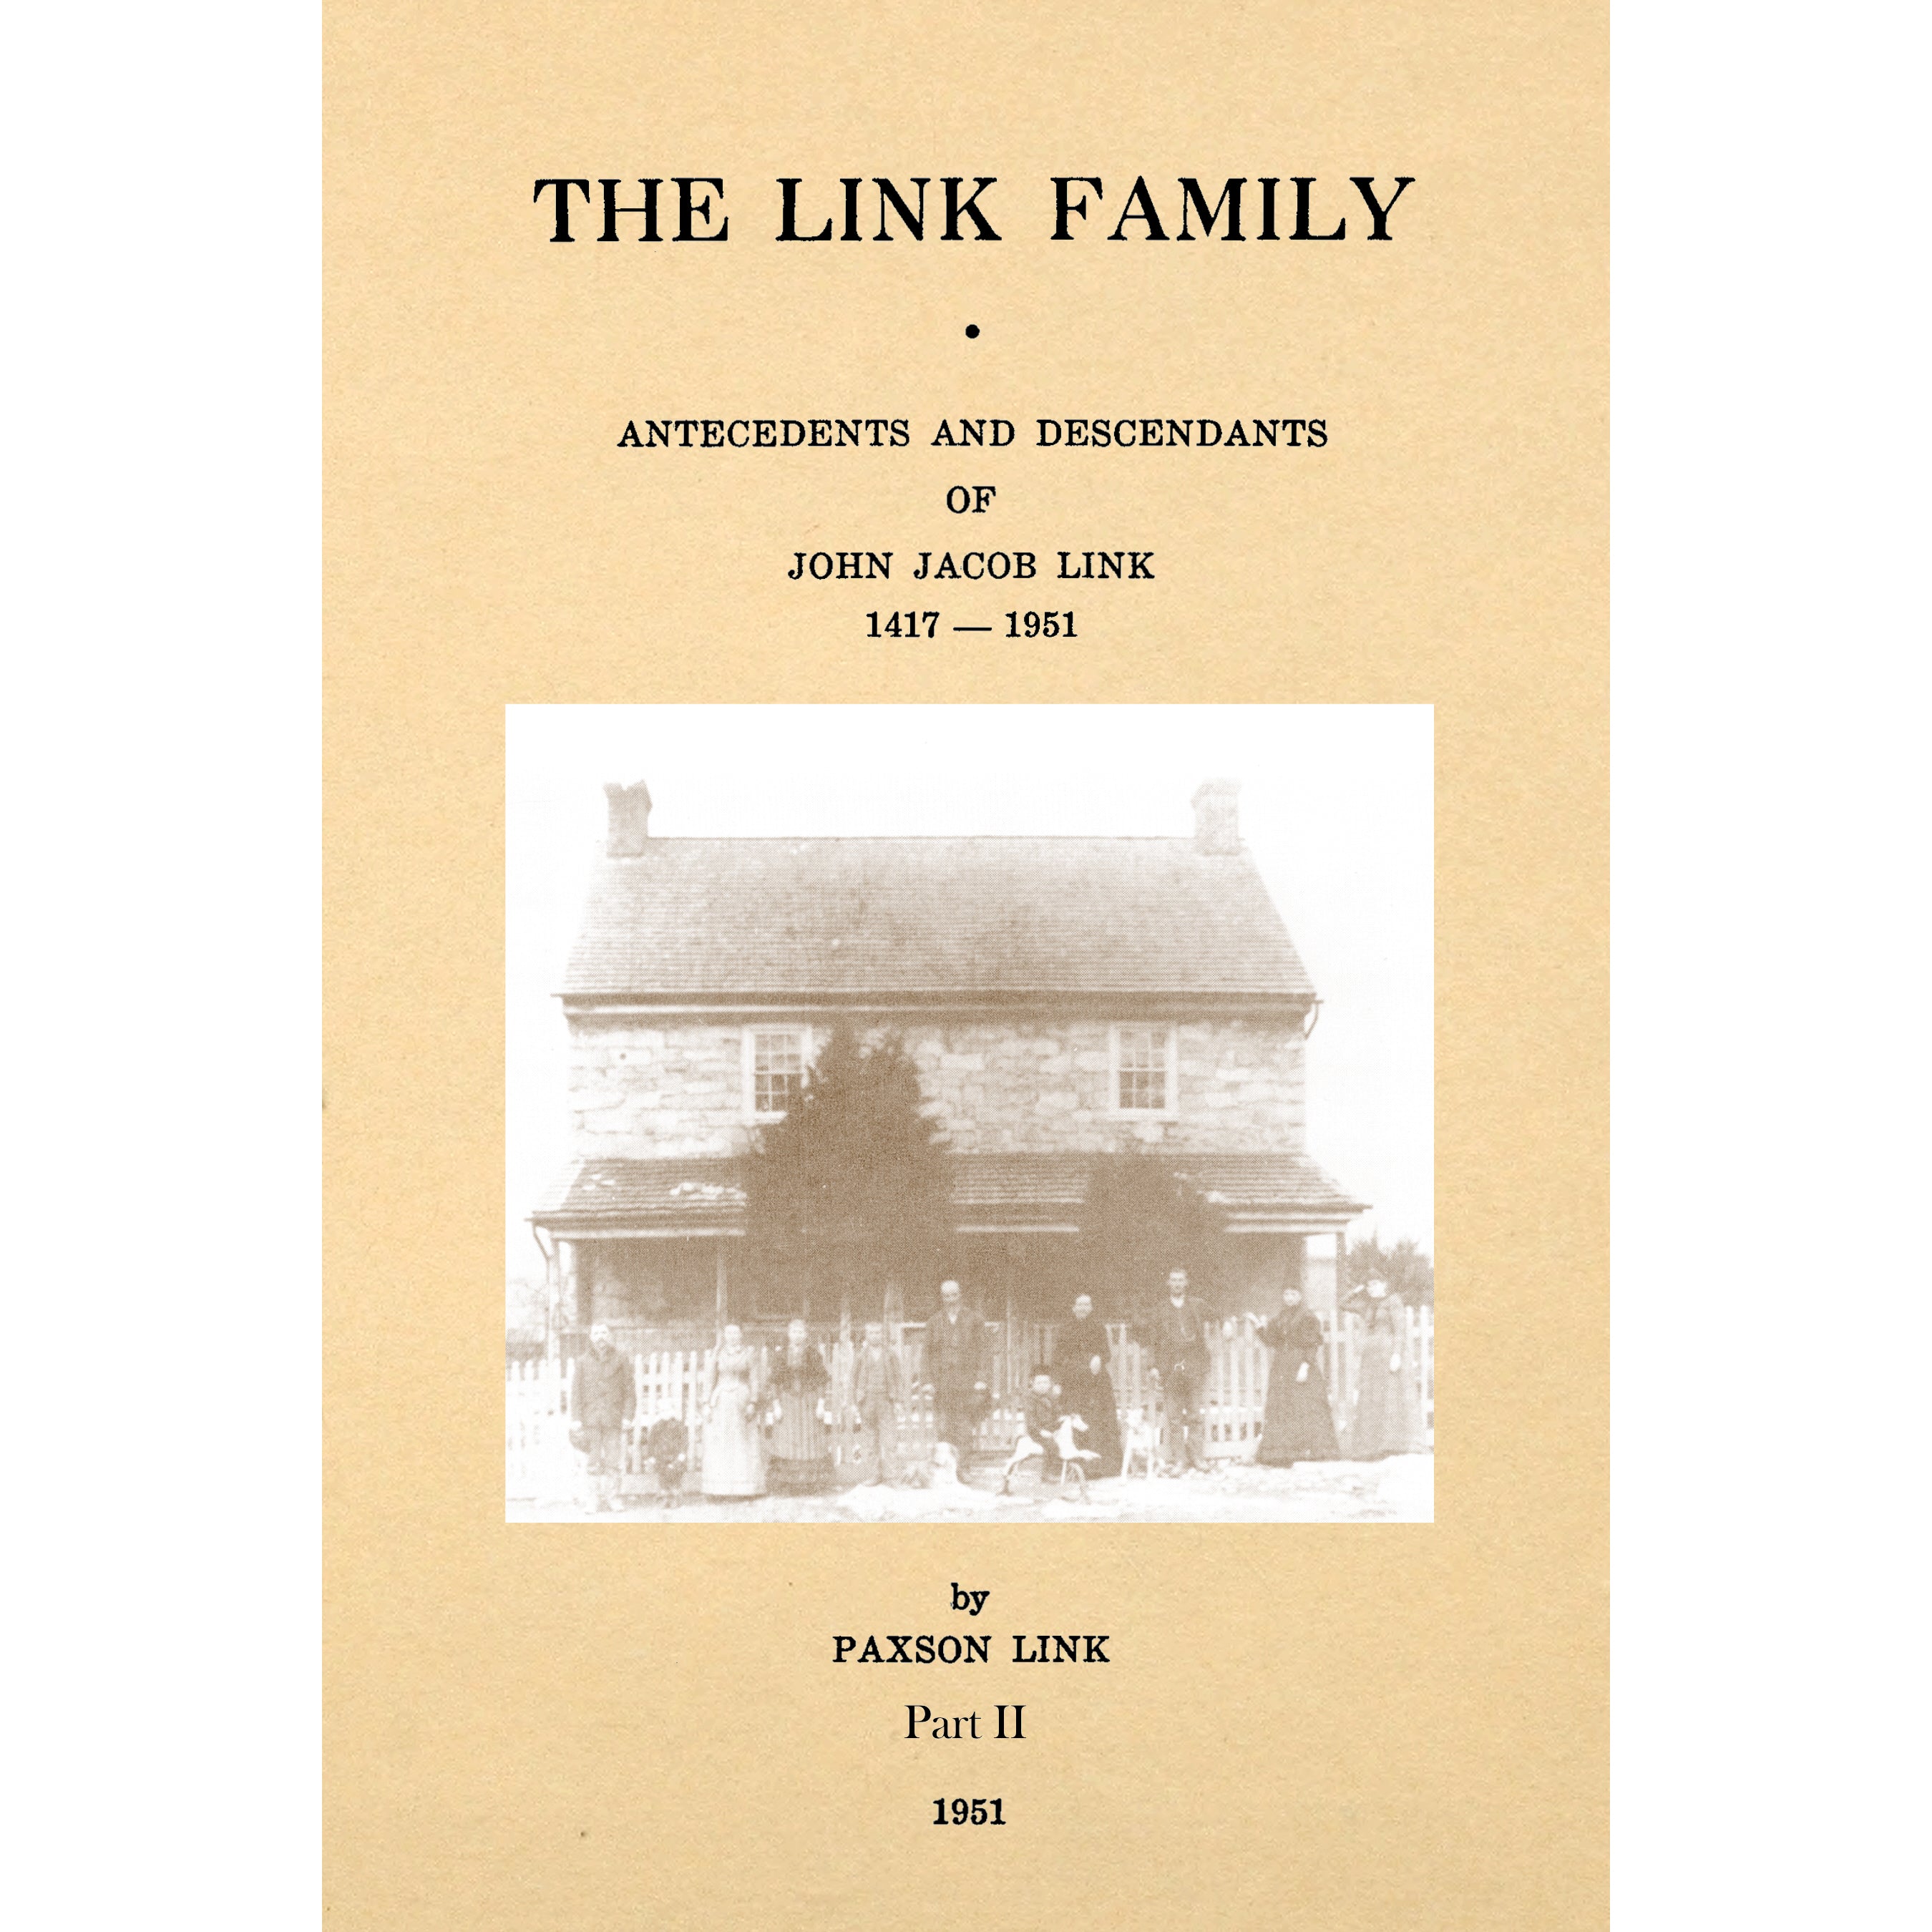 The Link Family Antecedents And Descendants Of John Jacob Link 1417 -